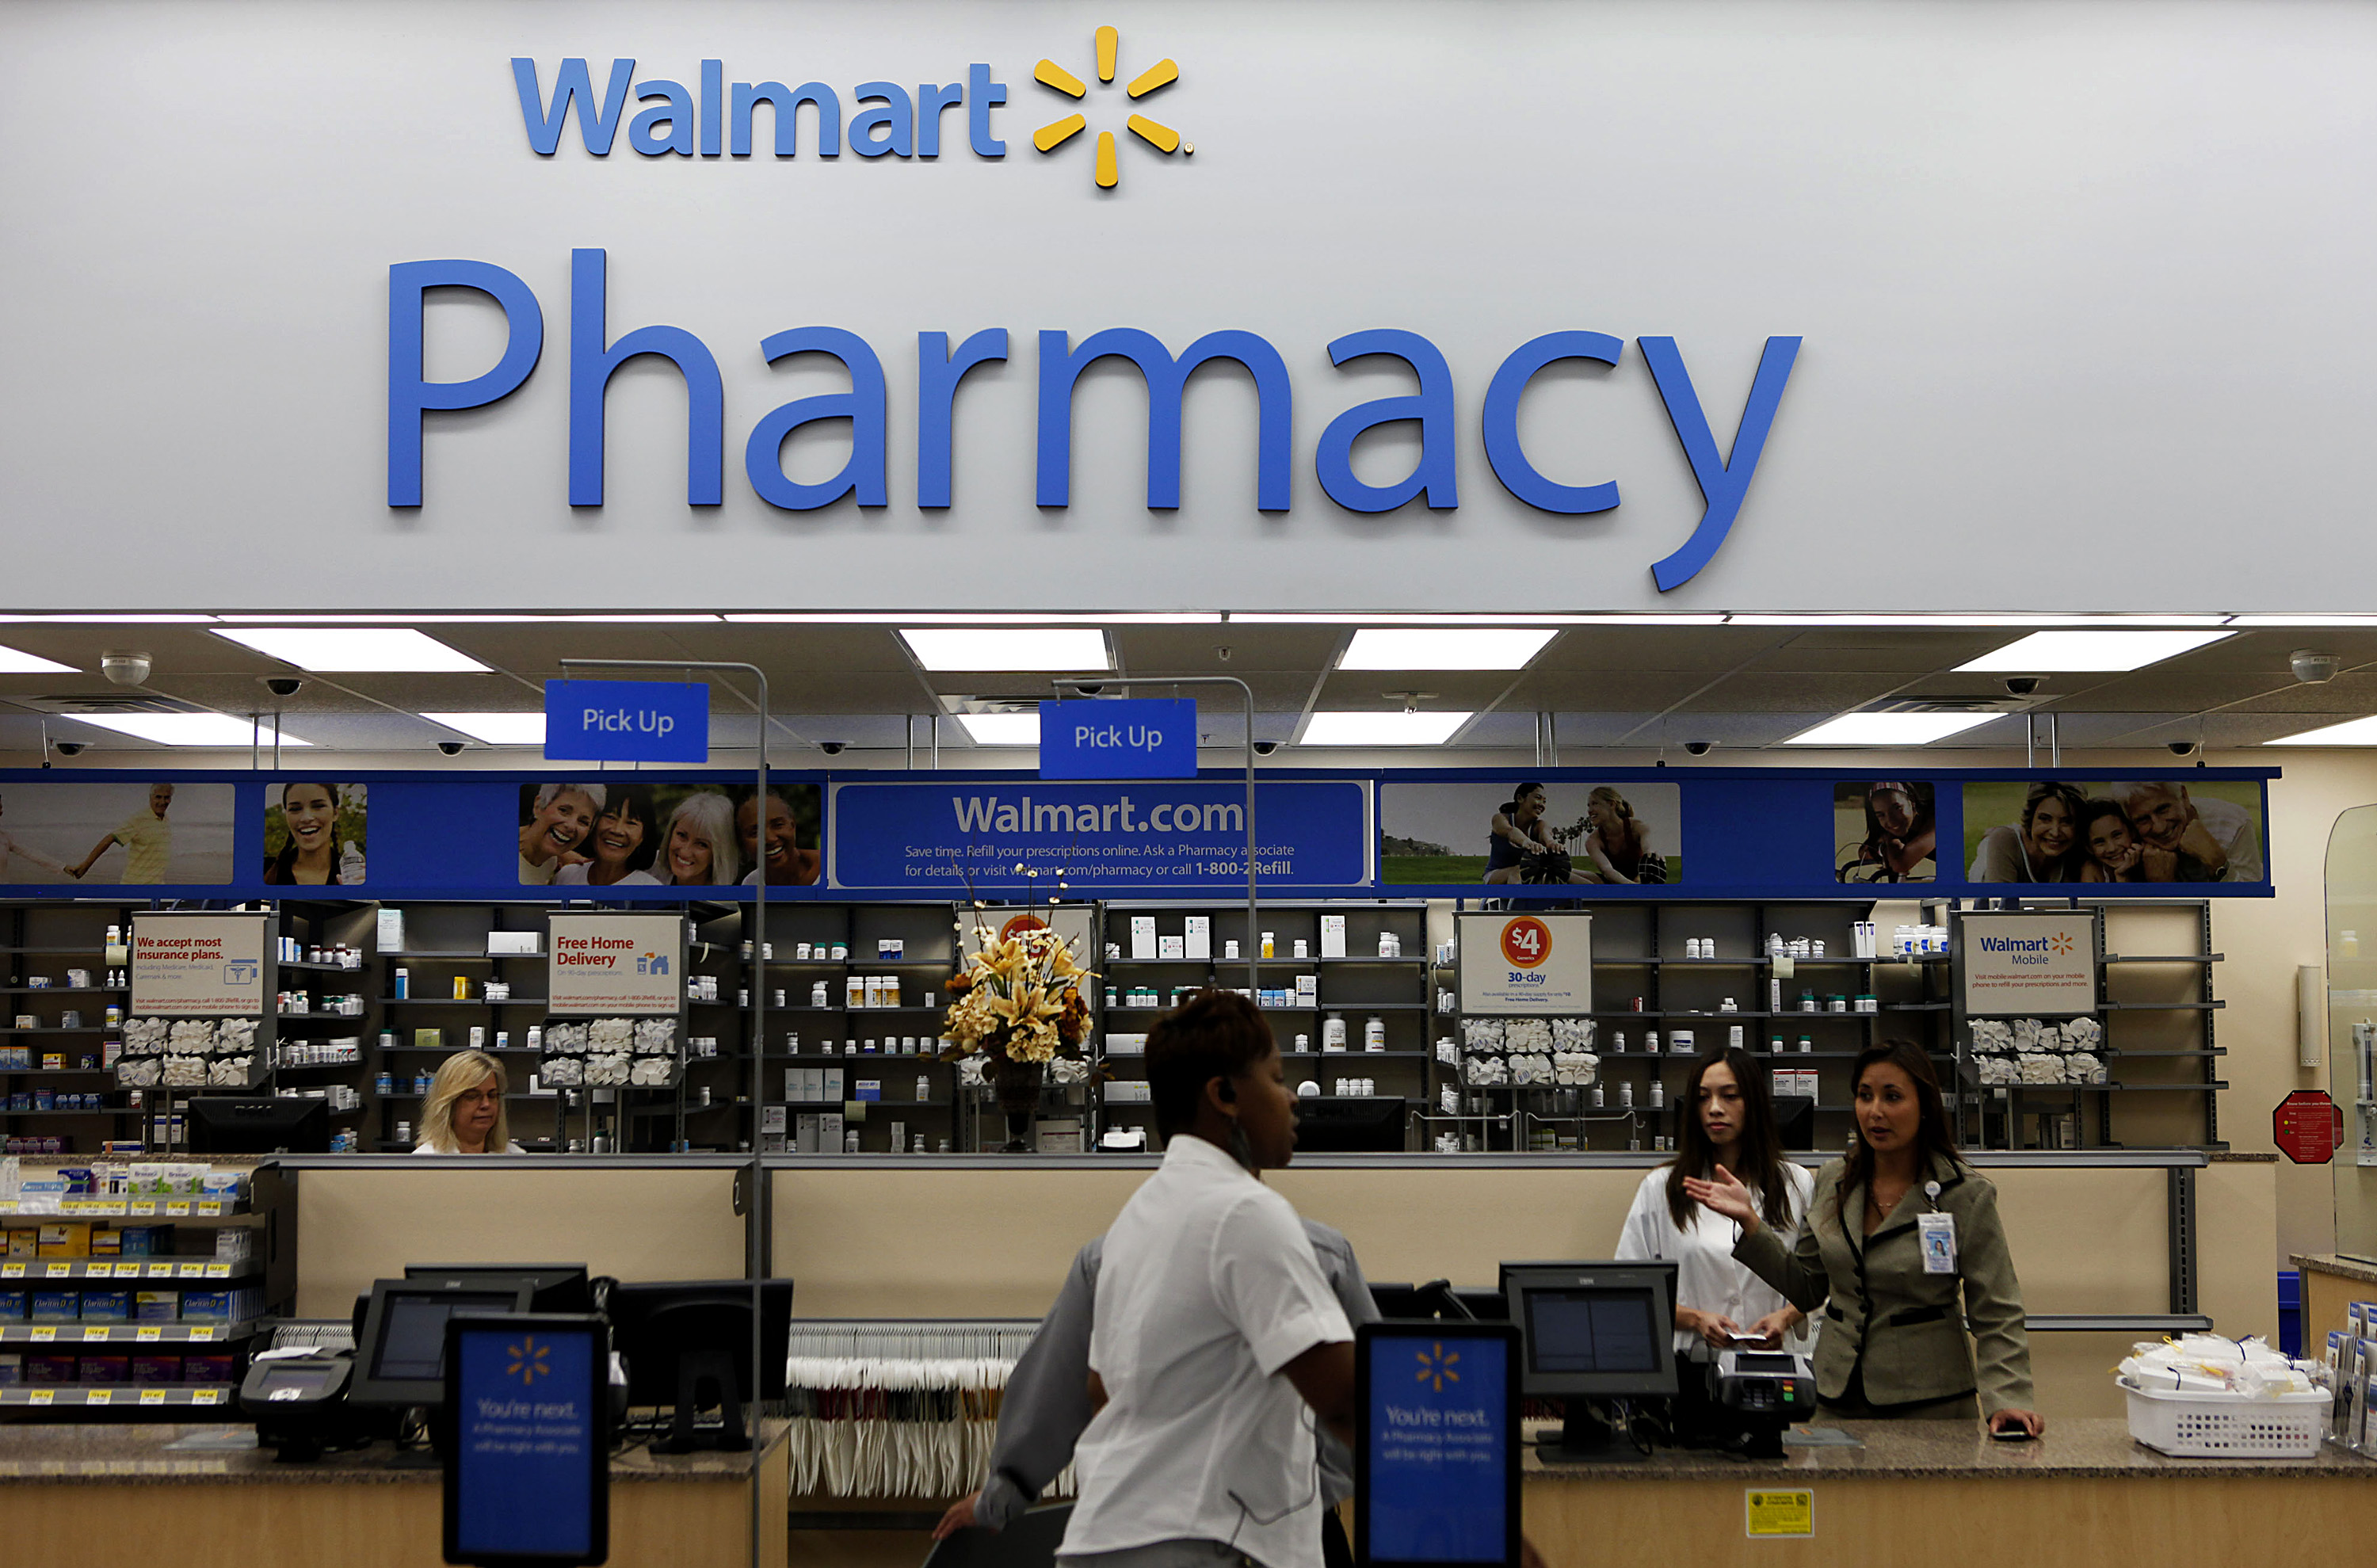 A customer walks past the pharmacy during the grand opening of a new Wal-Mart Stores Inc. location in Torrance, California, U.S., on Sept. 12, 2012. (Patrick Fallon—Bloomberg/Getty Images)